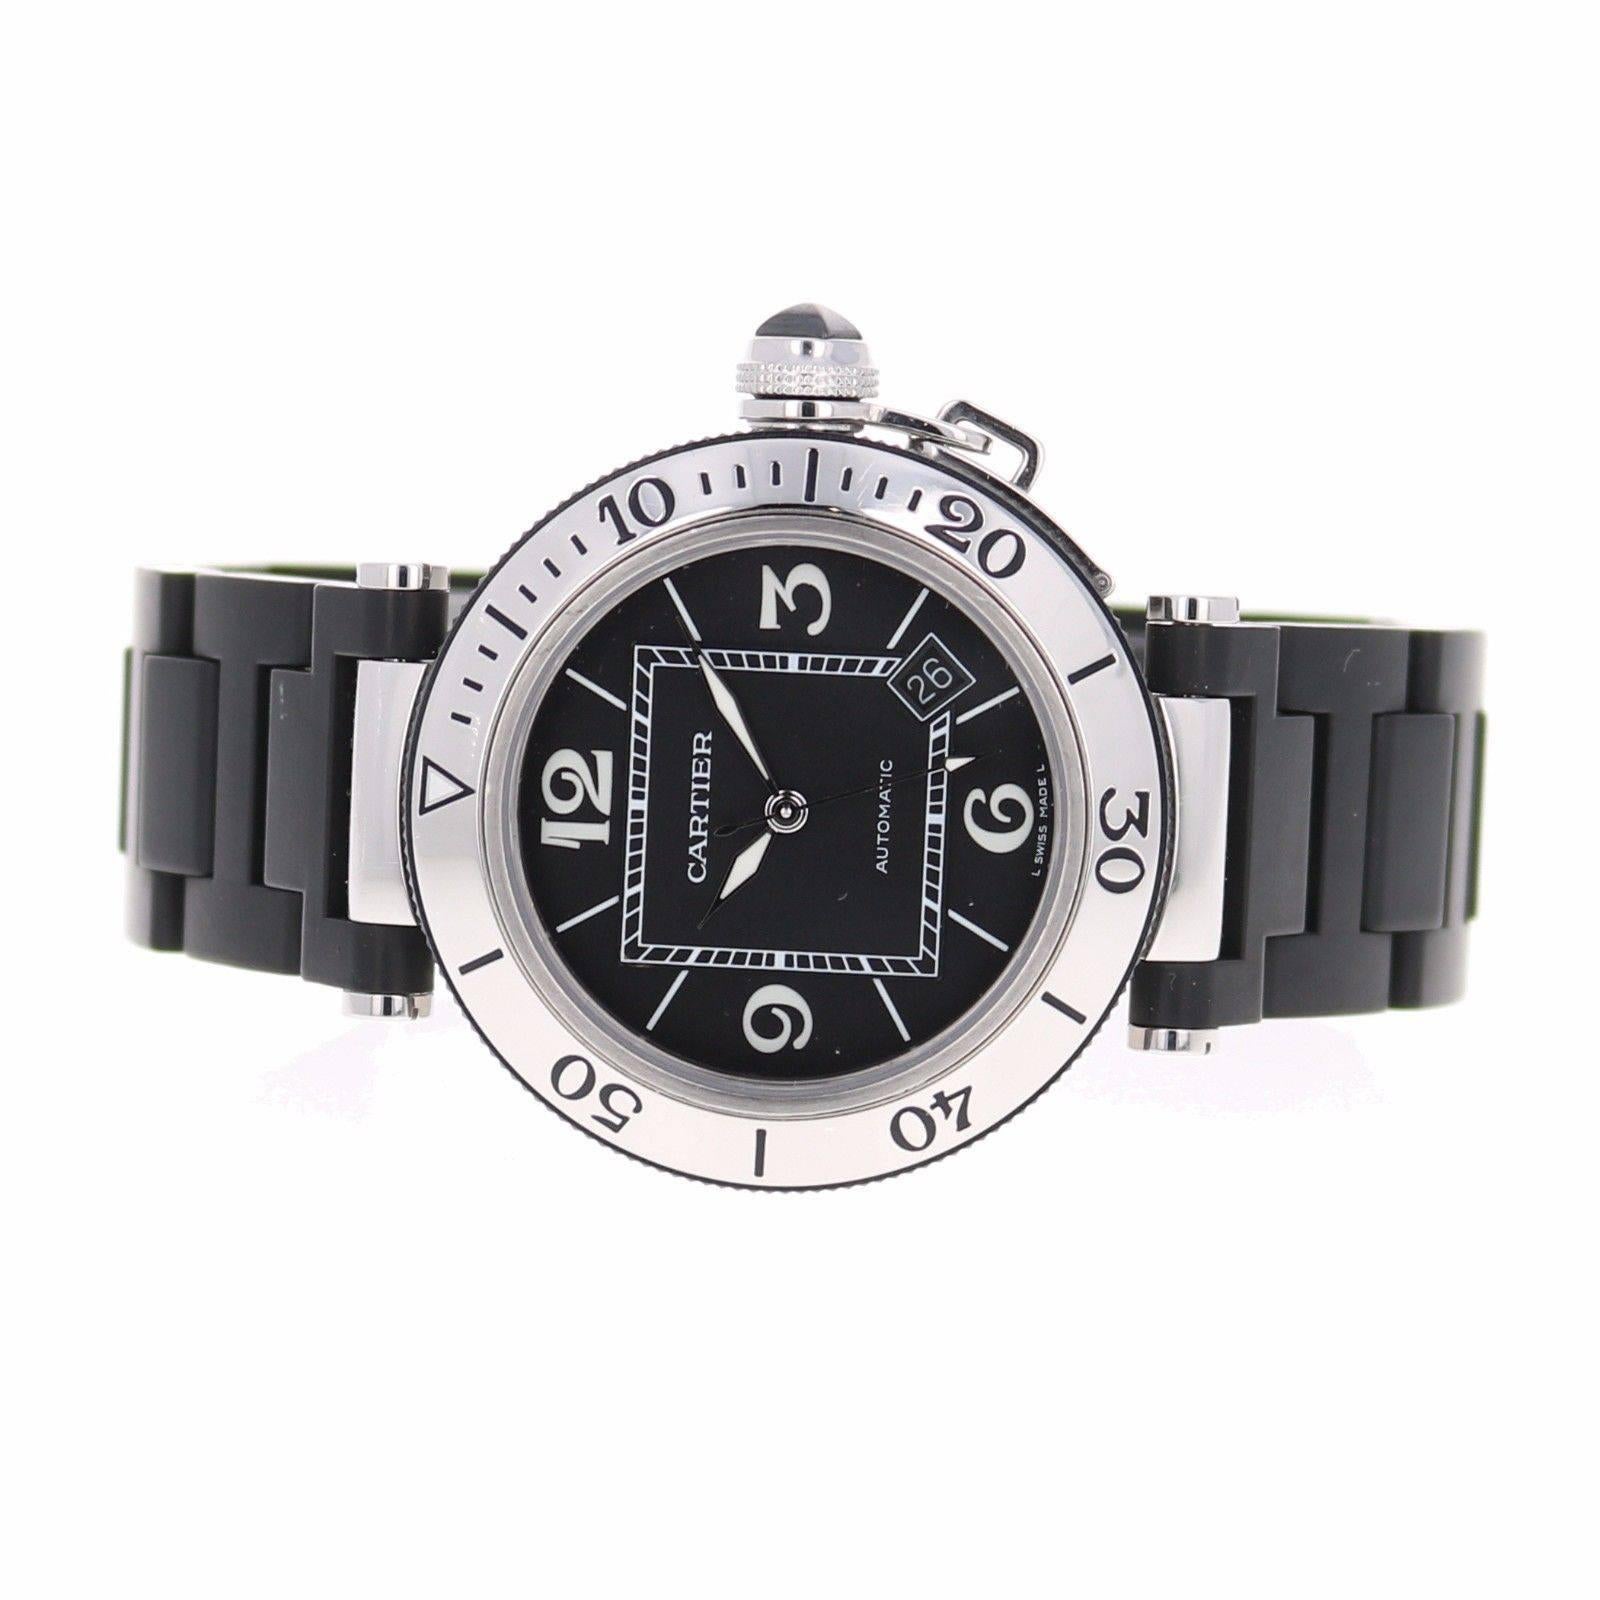 Cartier Stainless Steel Pasha Seatimer Rubber Automatic Wristwatch 1